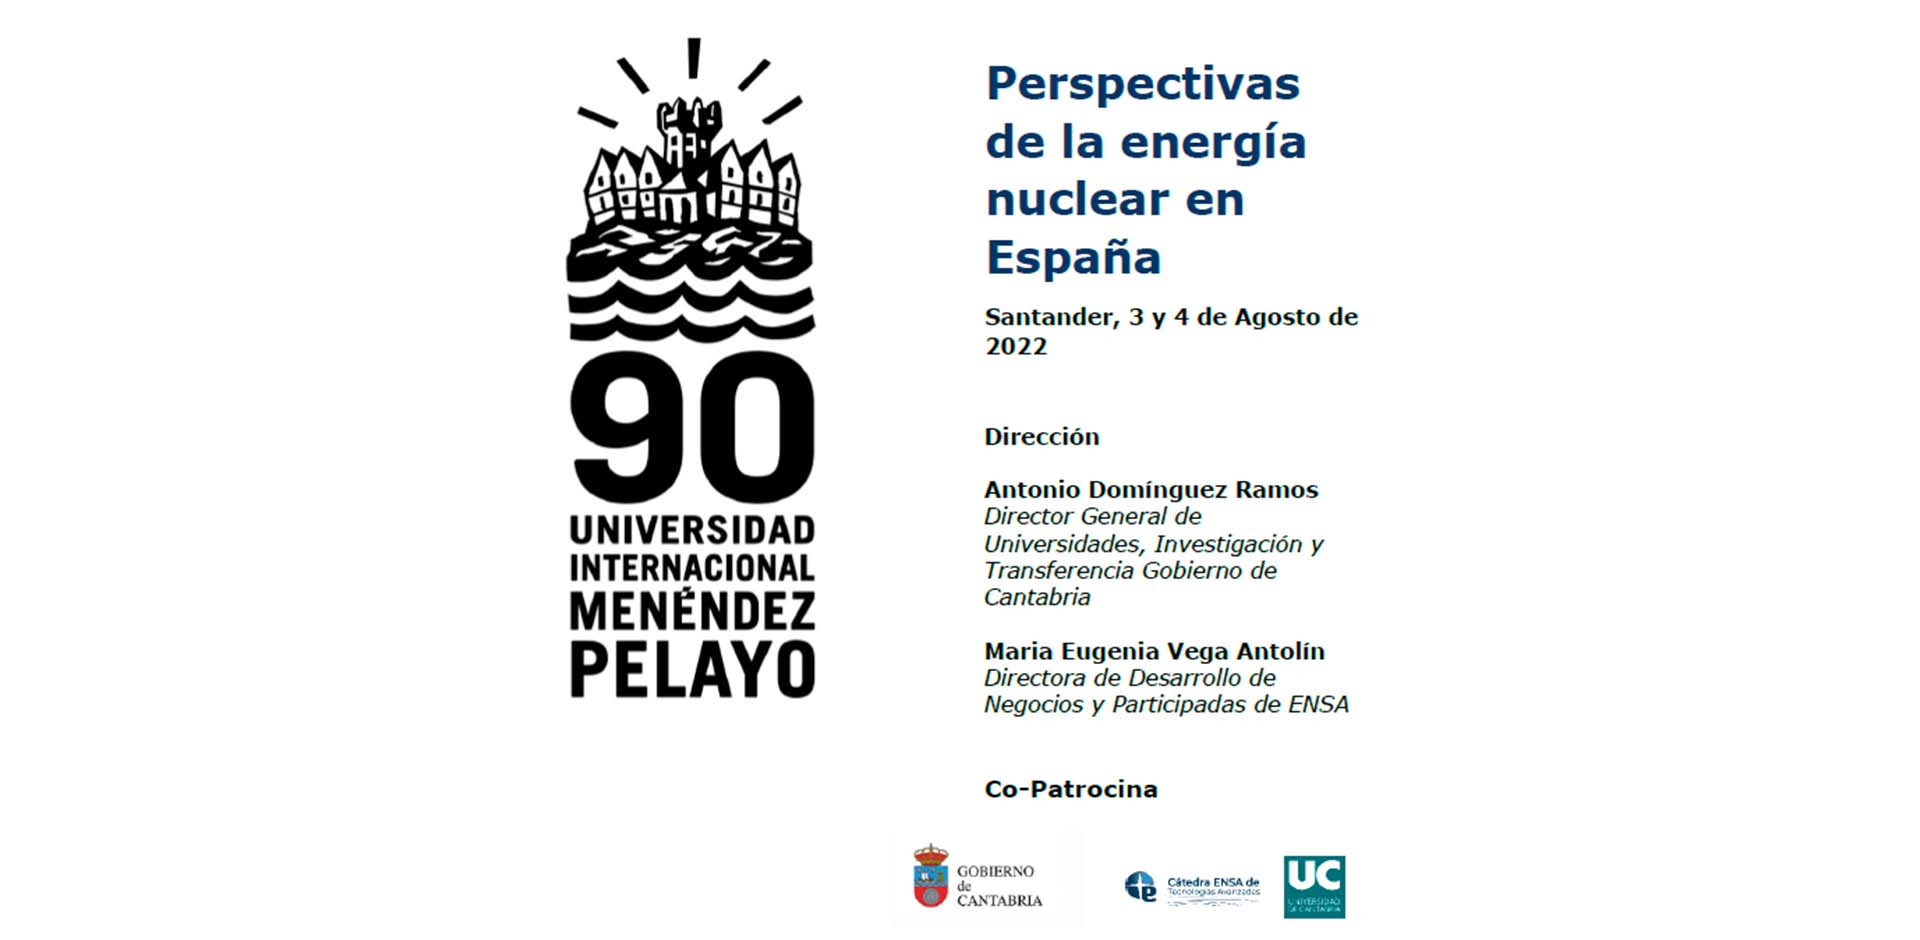 INGECID contributes its vision on the perspective of nuclear energy in Spain by participating in the UIMP summer courses